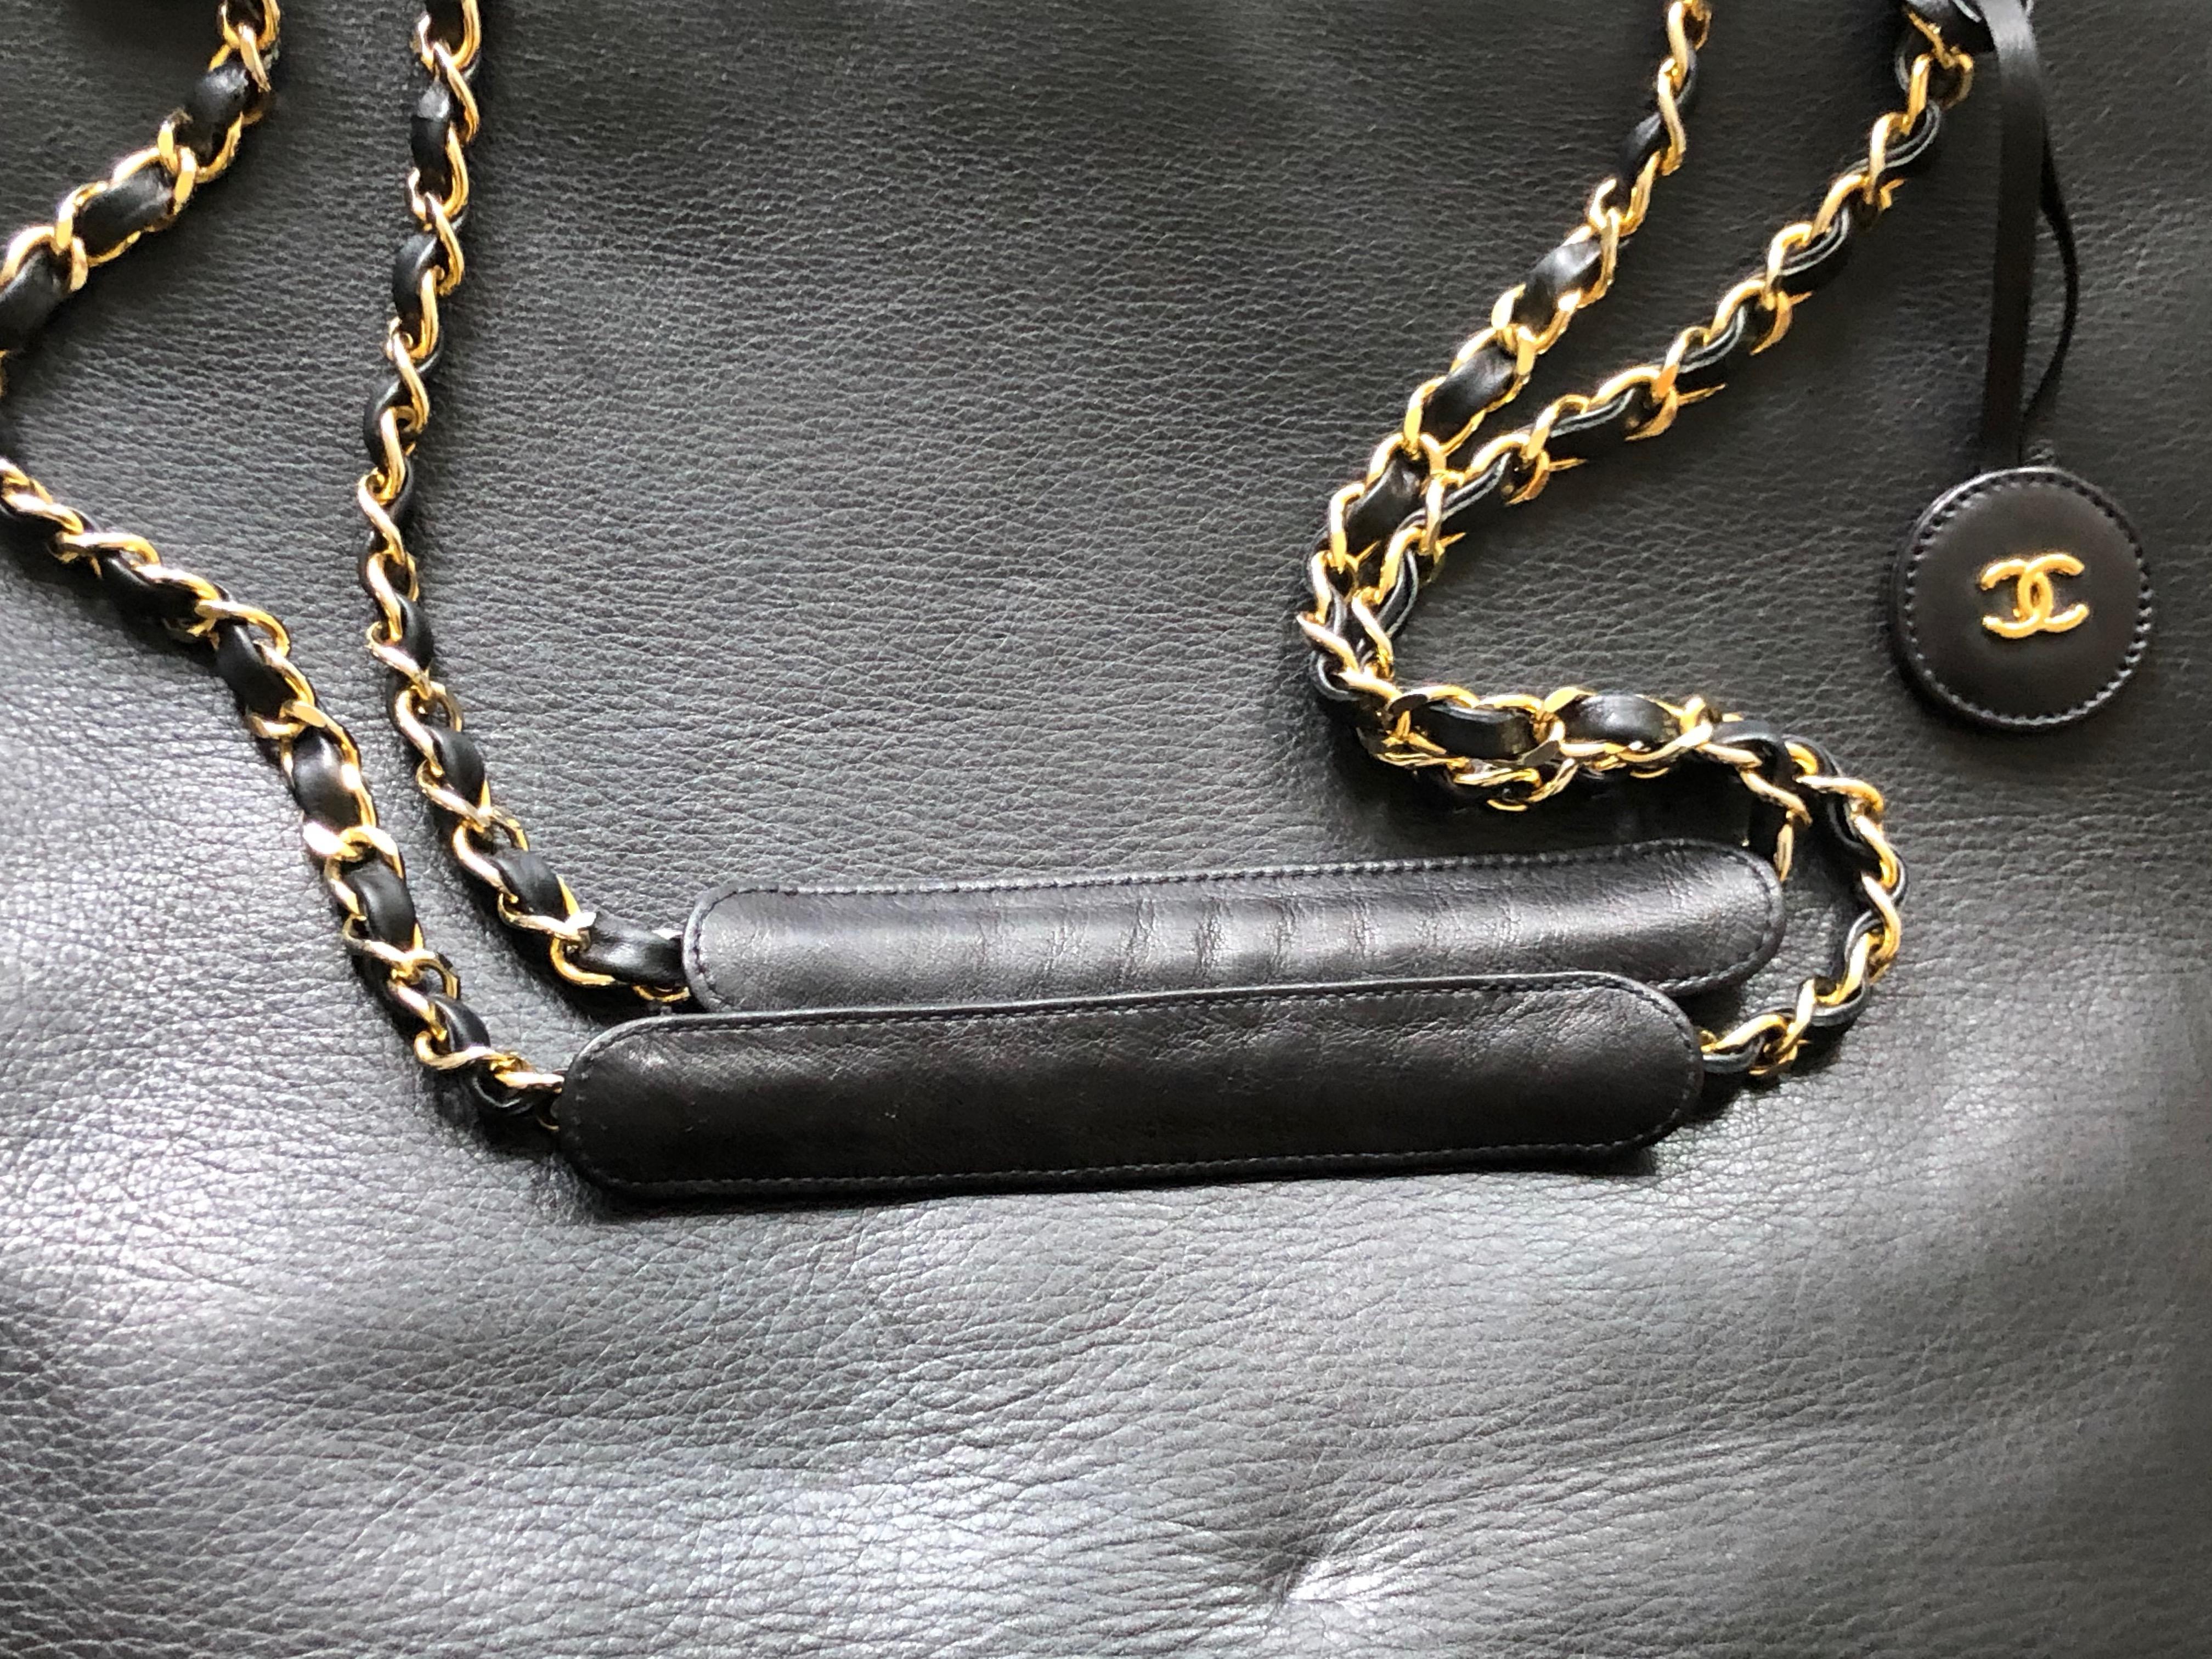 Chanel Large Black Leather Shoulder Bag with Gold Hardware and Quilted Details  In Good Condition For Sale In Cloverdale, CA